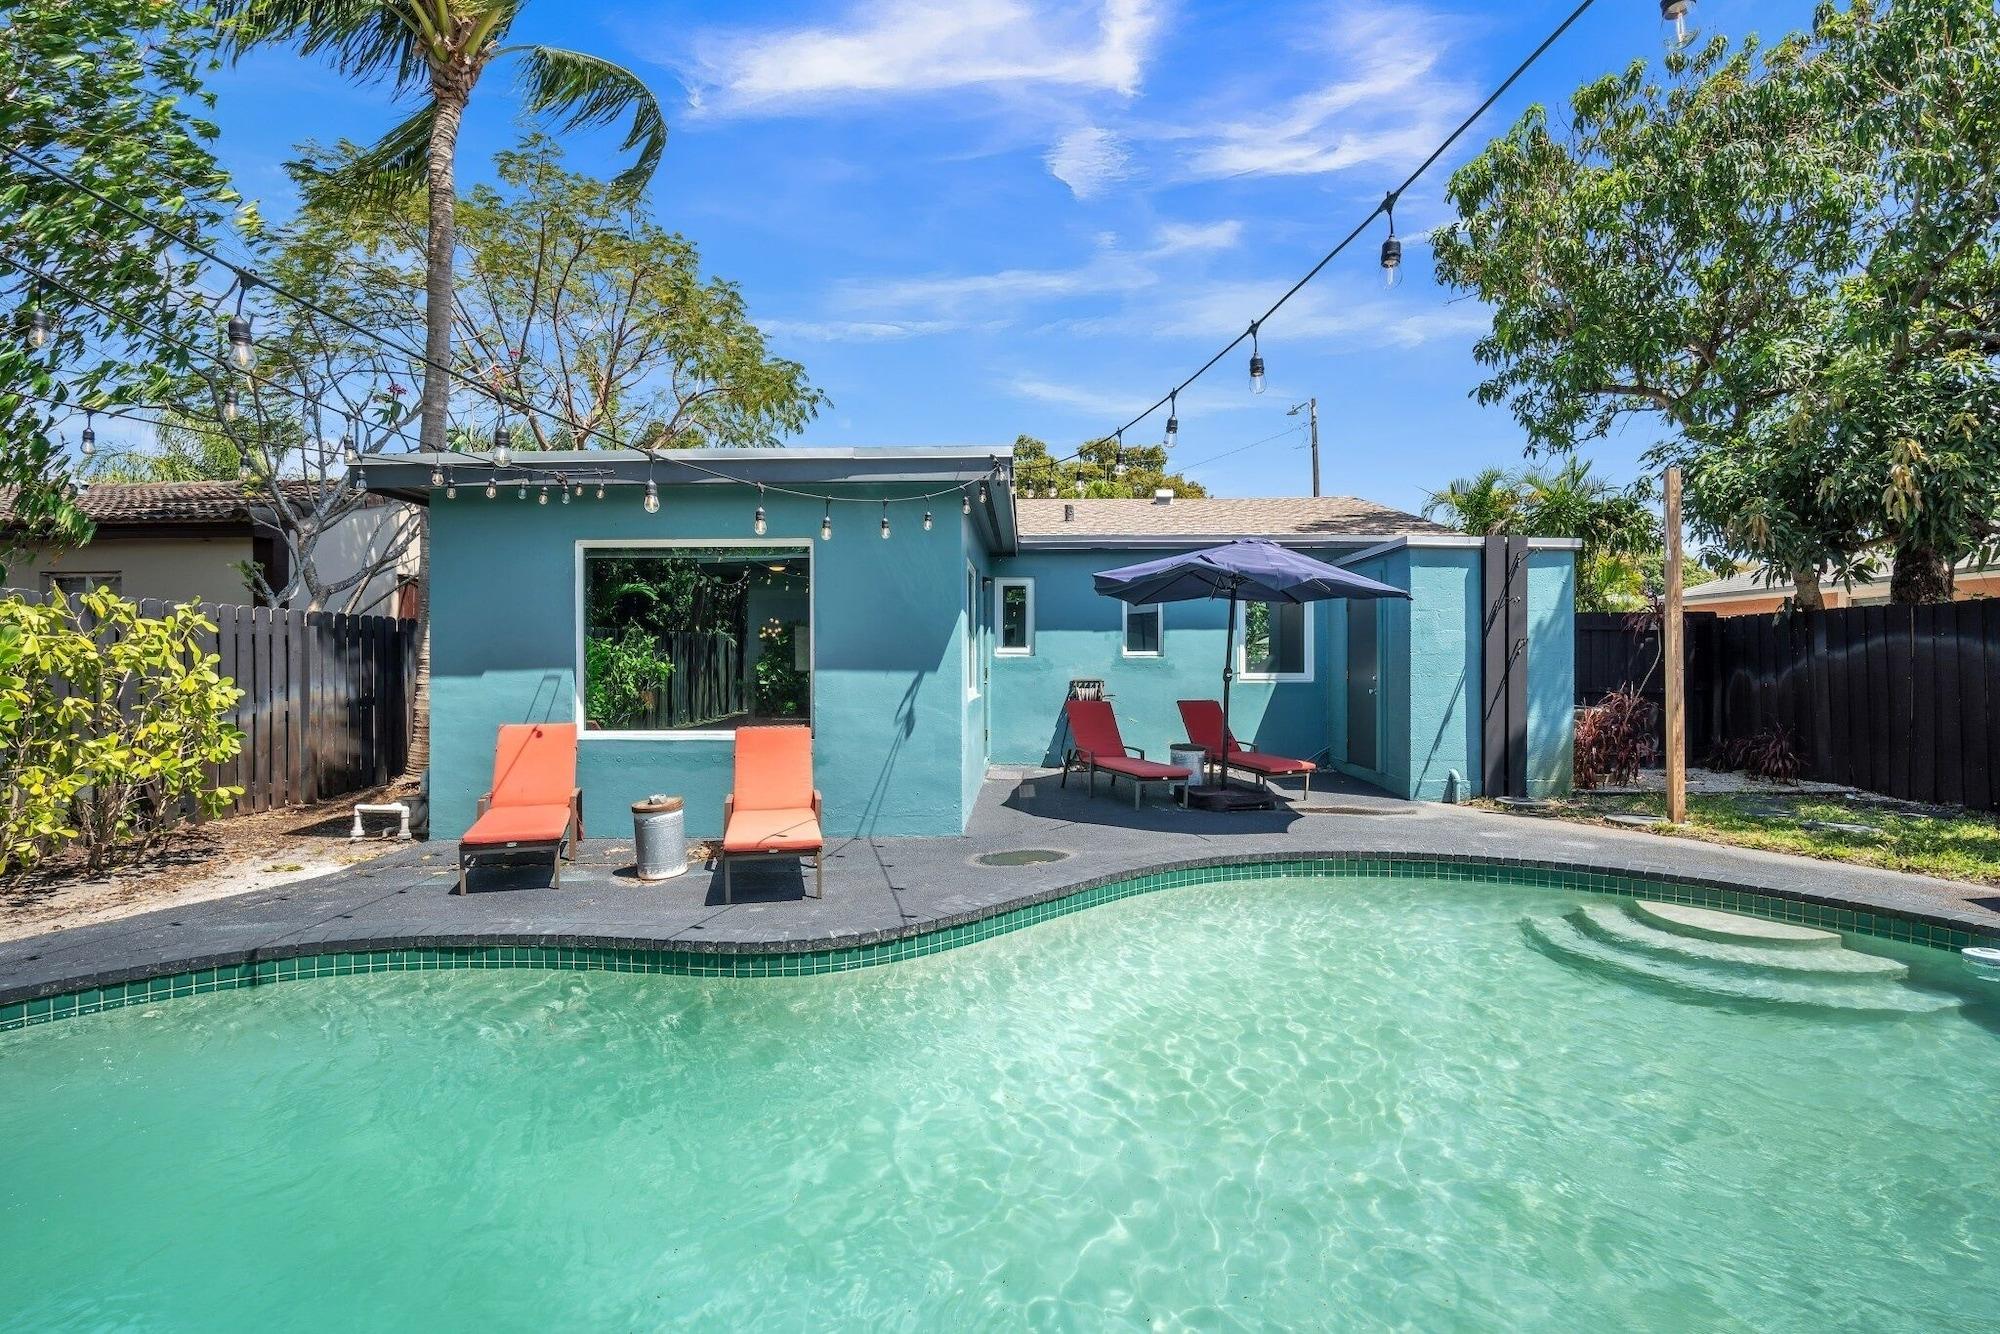 Pool view Great Wilton Manors Location With Two Separate Spaces! Perfect For Your Group! Newly Remodeled 3 Bedroom Home by Redawning